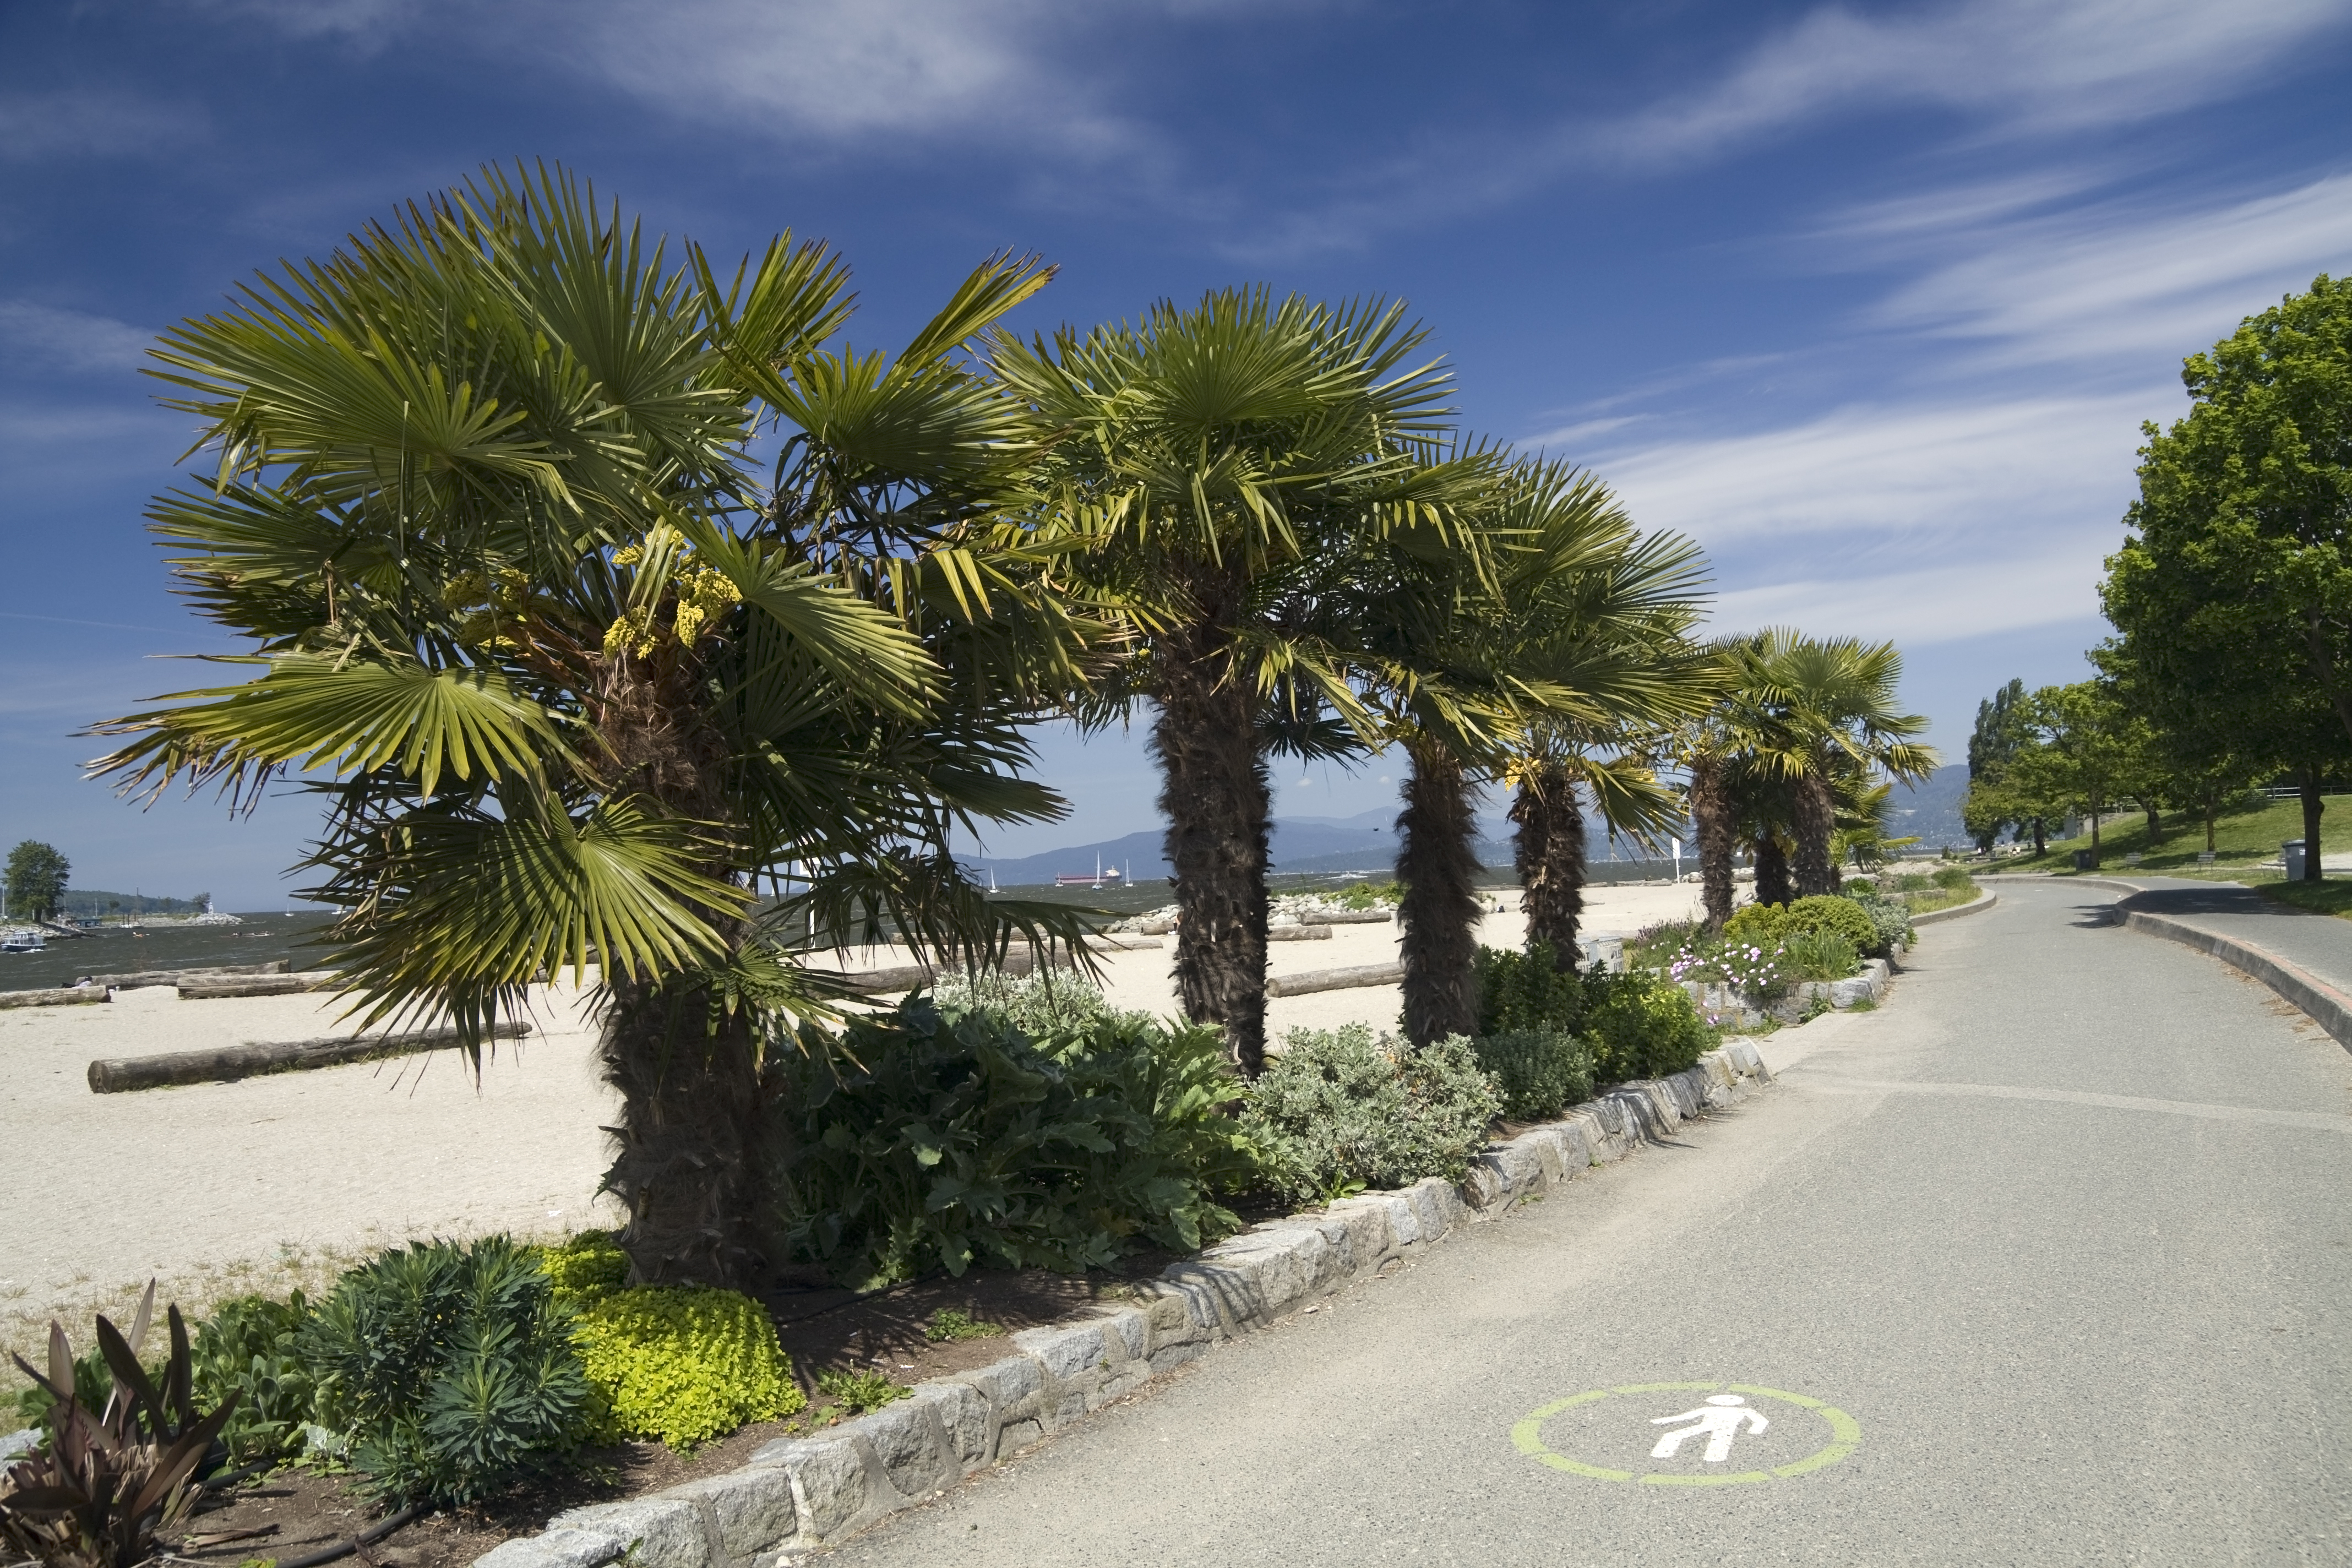 https://www.vmcdn.ca/f/files/via/images/stock-images/english-bay-vancouver-palm-trees.jpg